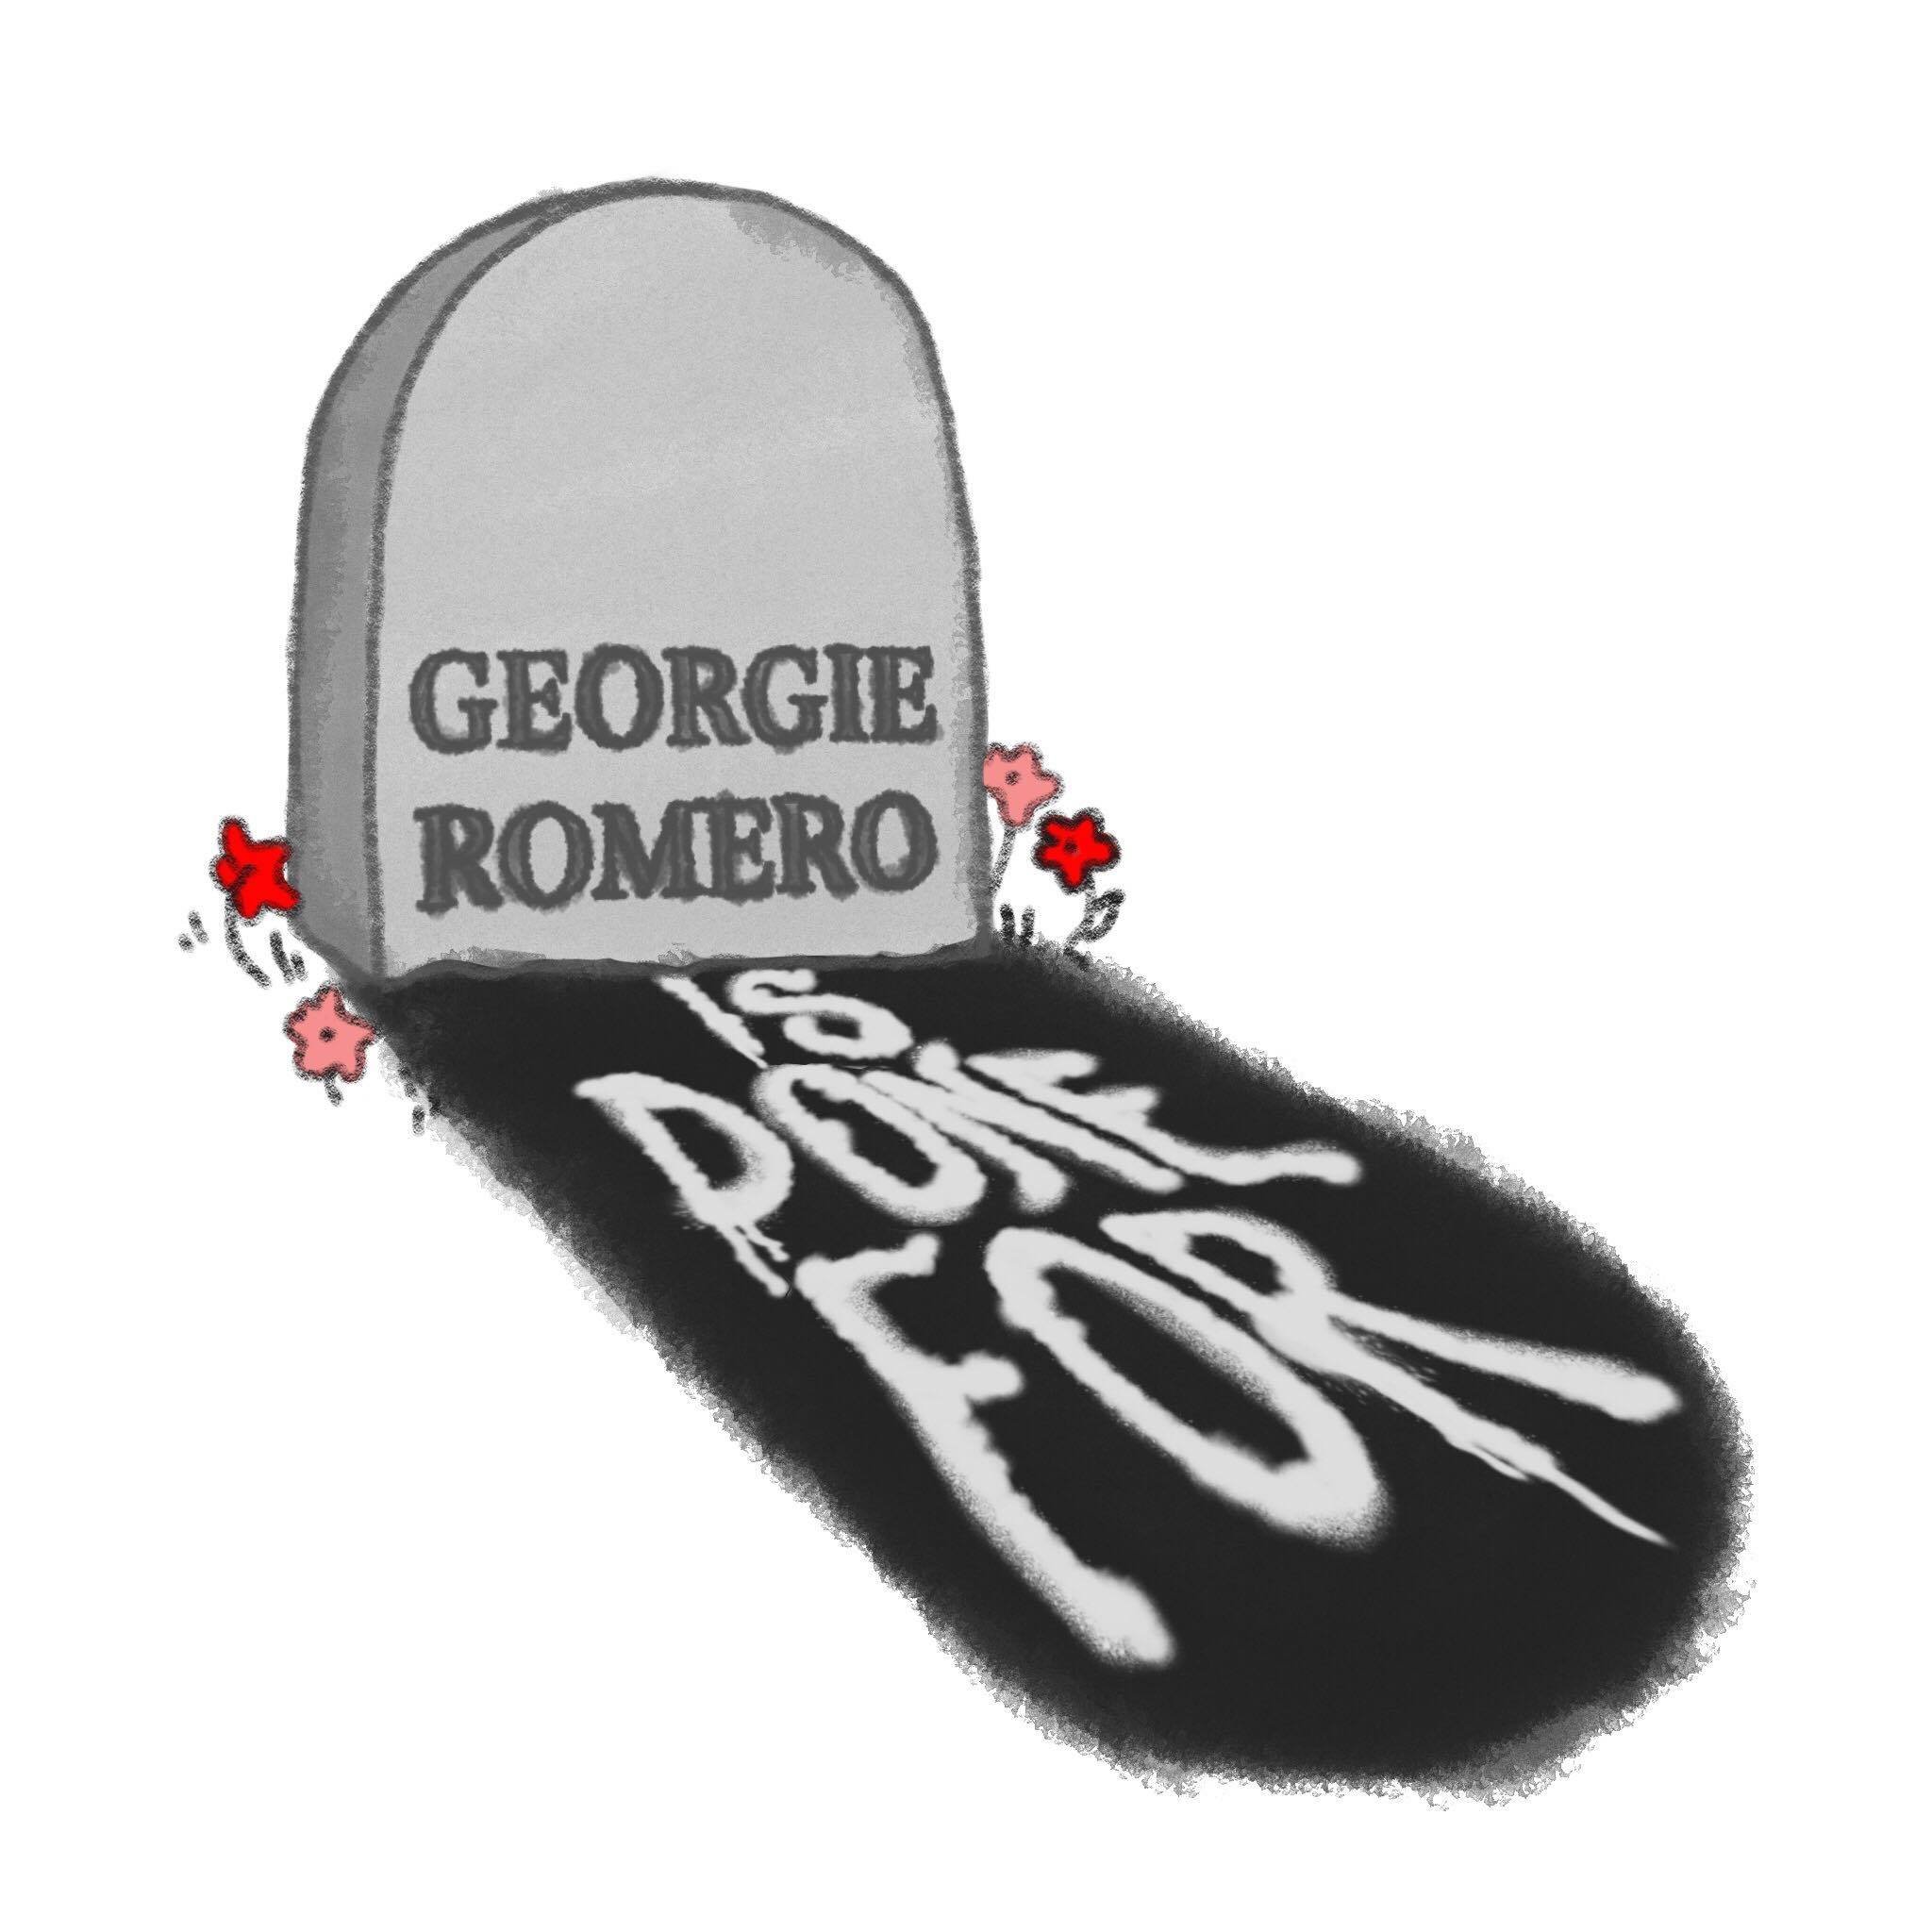 Georgie Romero Is Done For (Additional Writing)